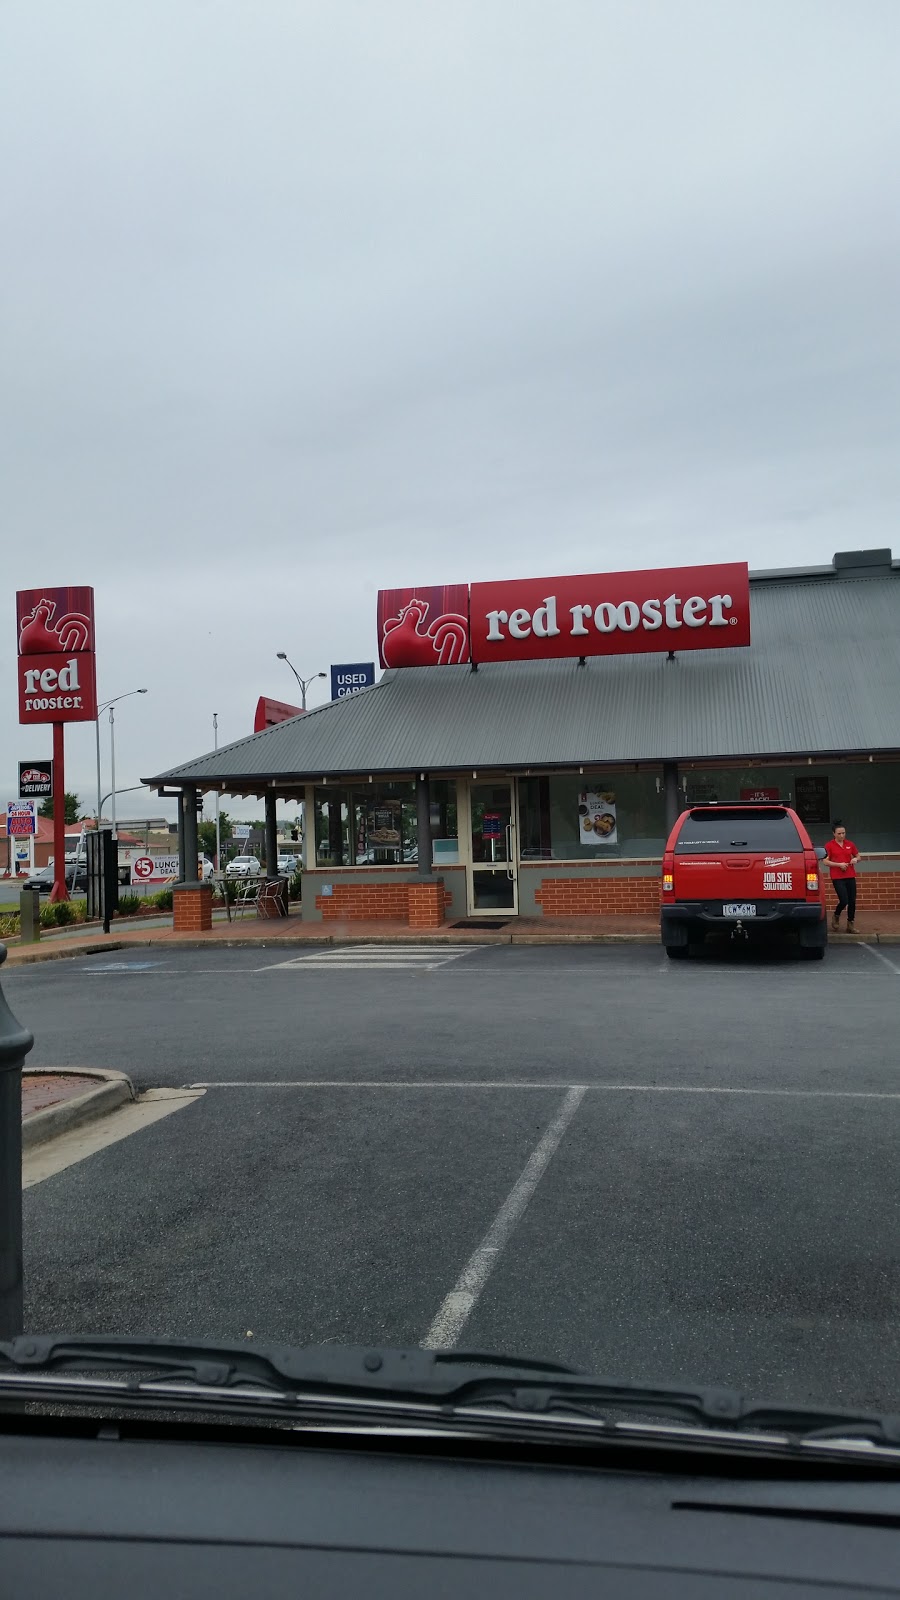 Red Rooster | restaurant | 62/64 High St, Wodonga VIC 3690, Australia | 0260241628 OR +61 2 6024 1628